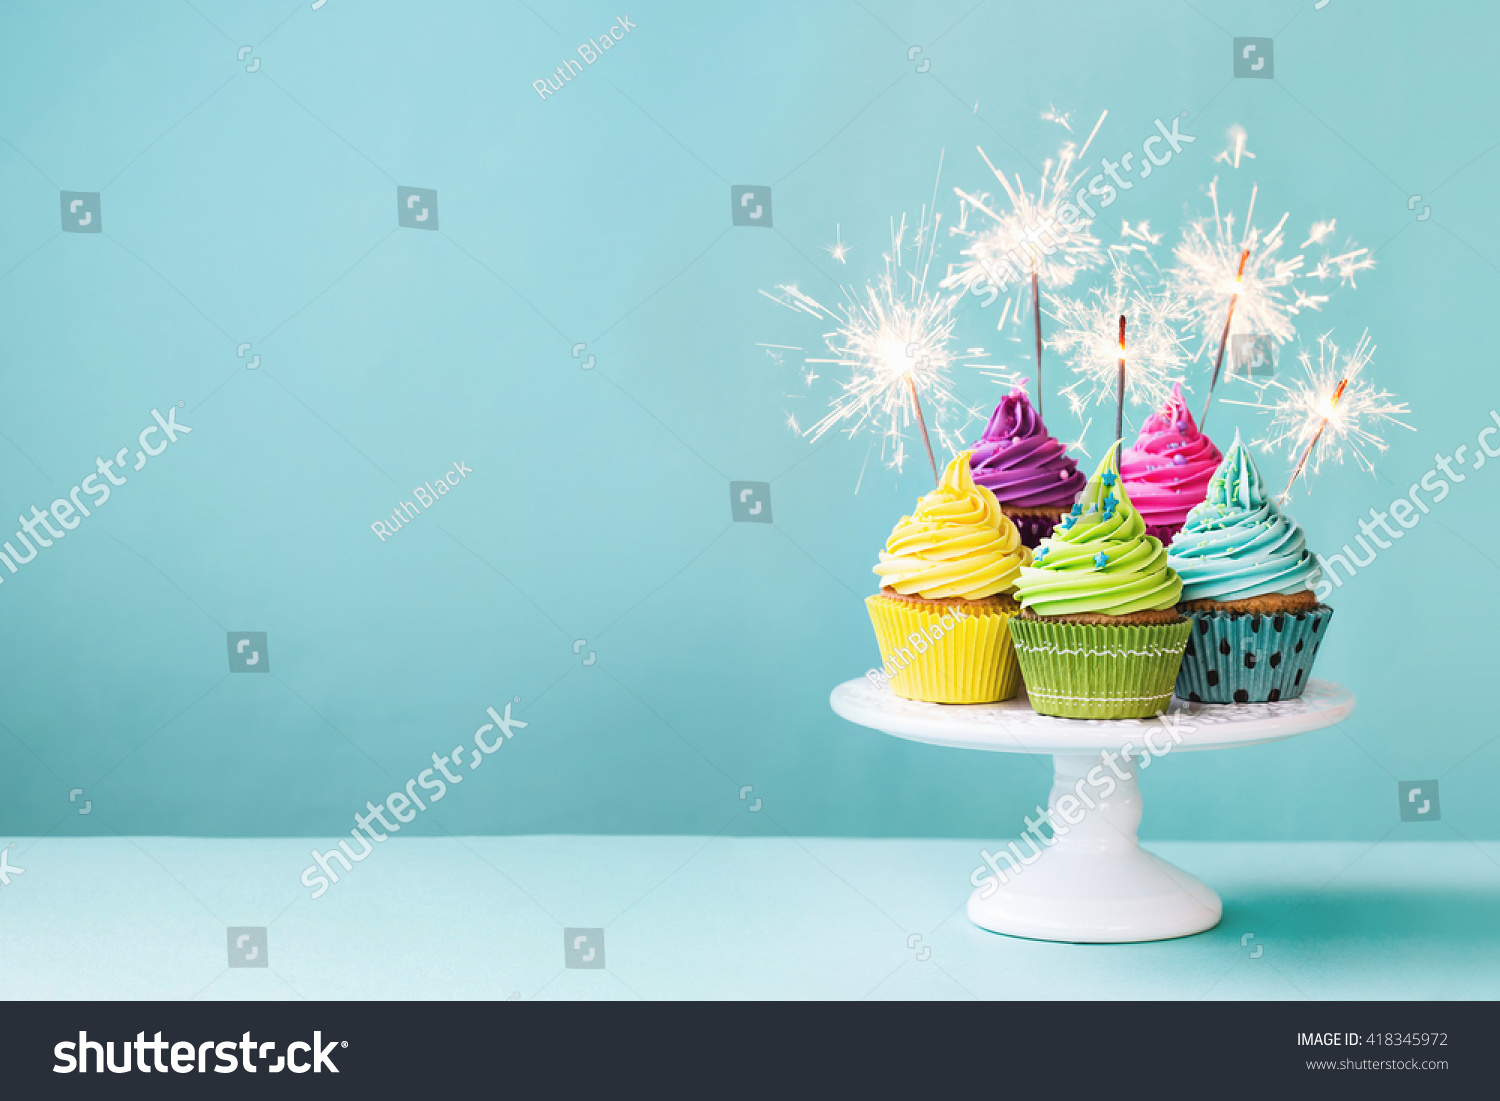 Cupcakes on a cake stand with sparklers #418345972